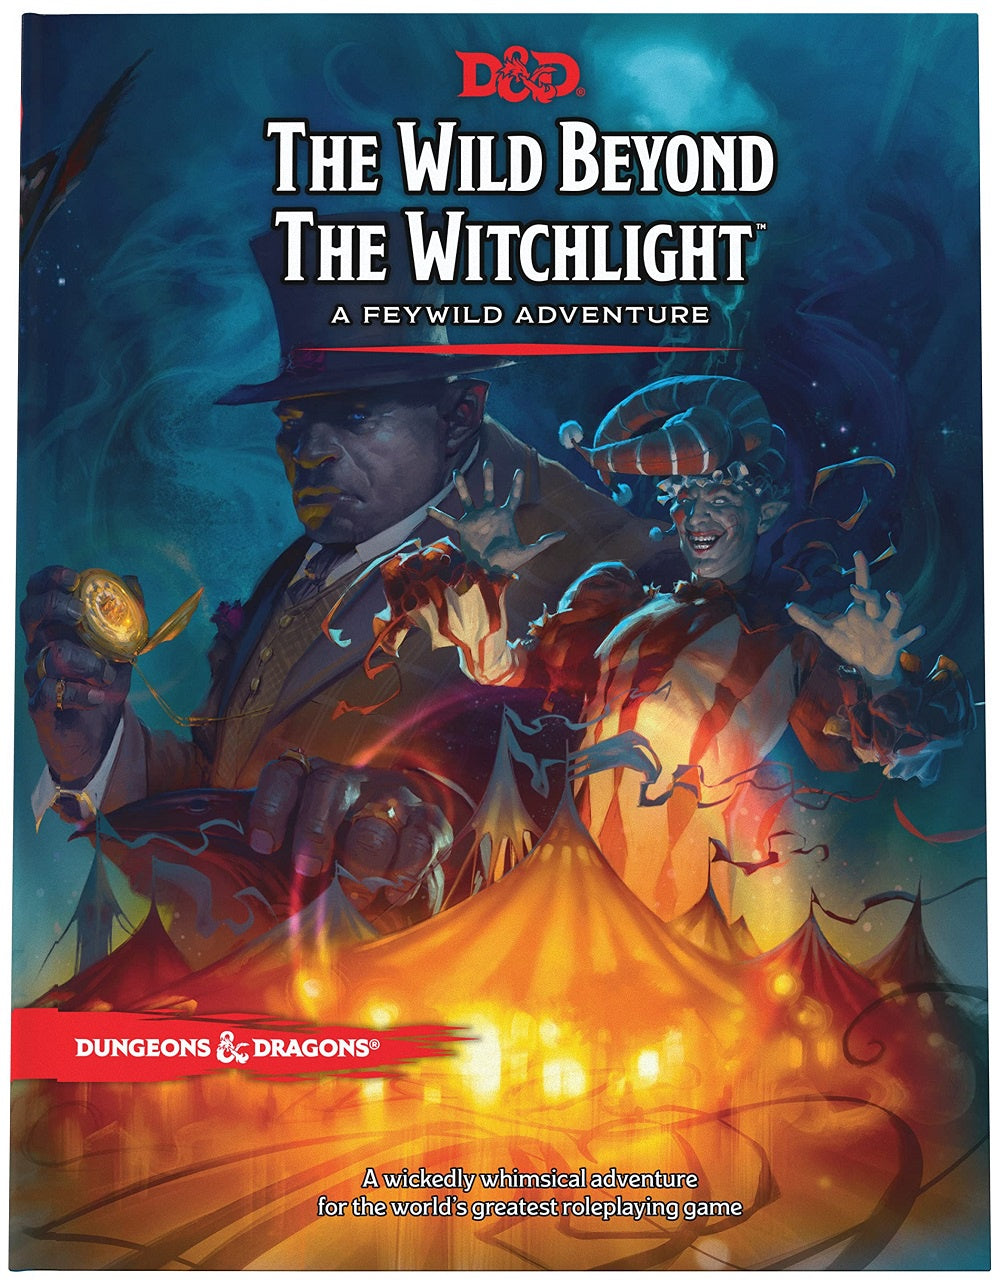 Dungeons & Dragons 5th Edition - The Wild Beyond The Witchlight A Feywild Adventure (Hardcover)